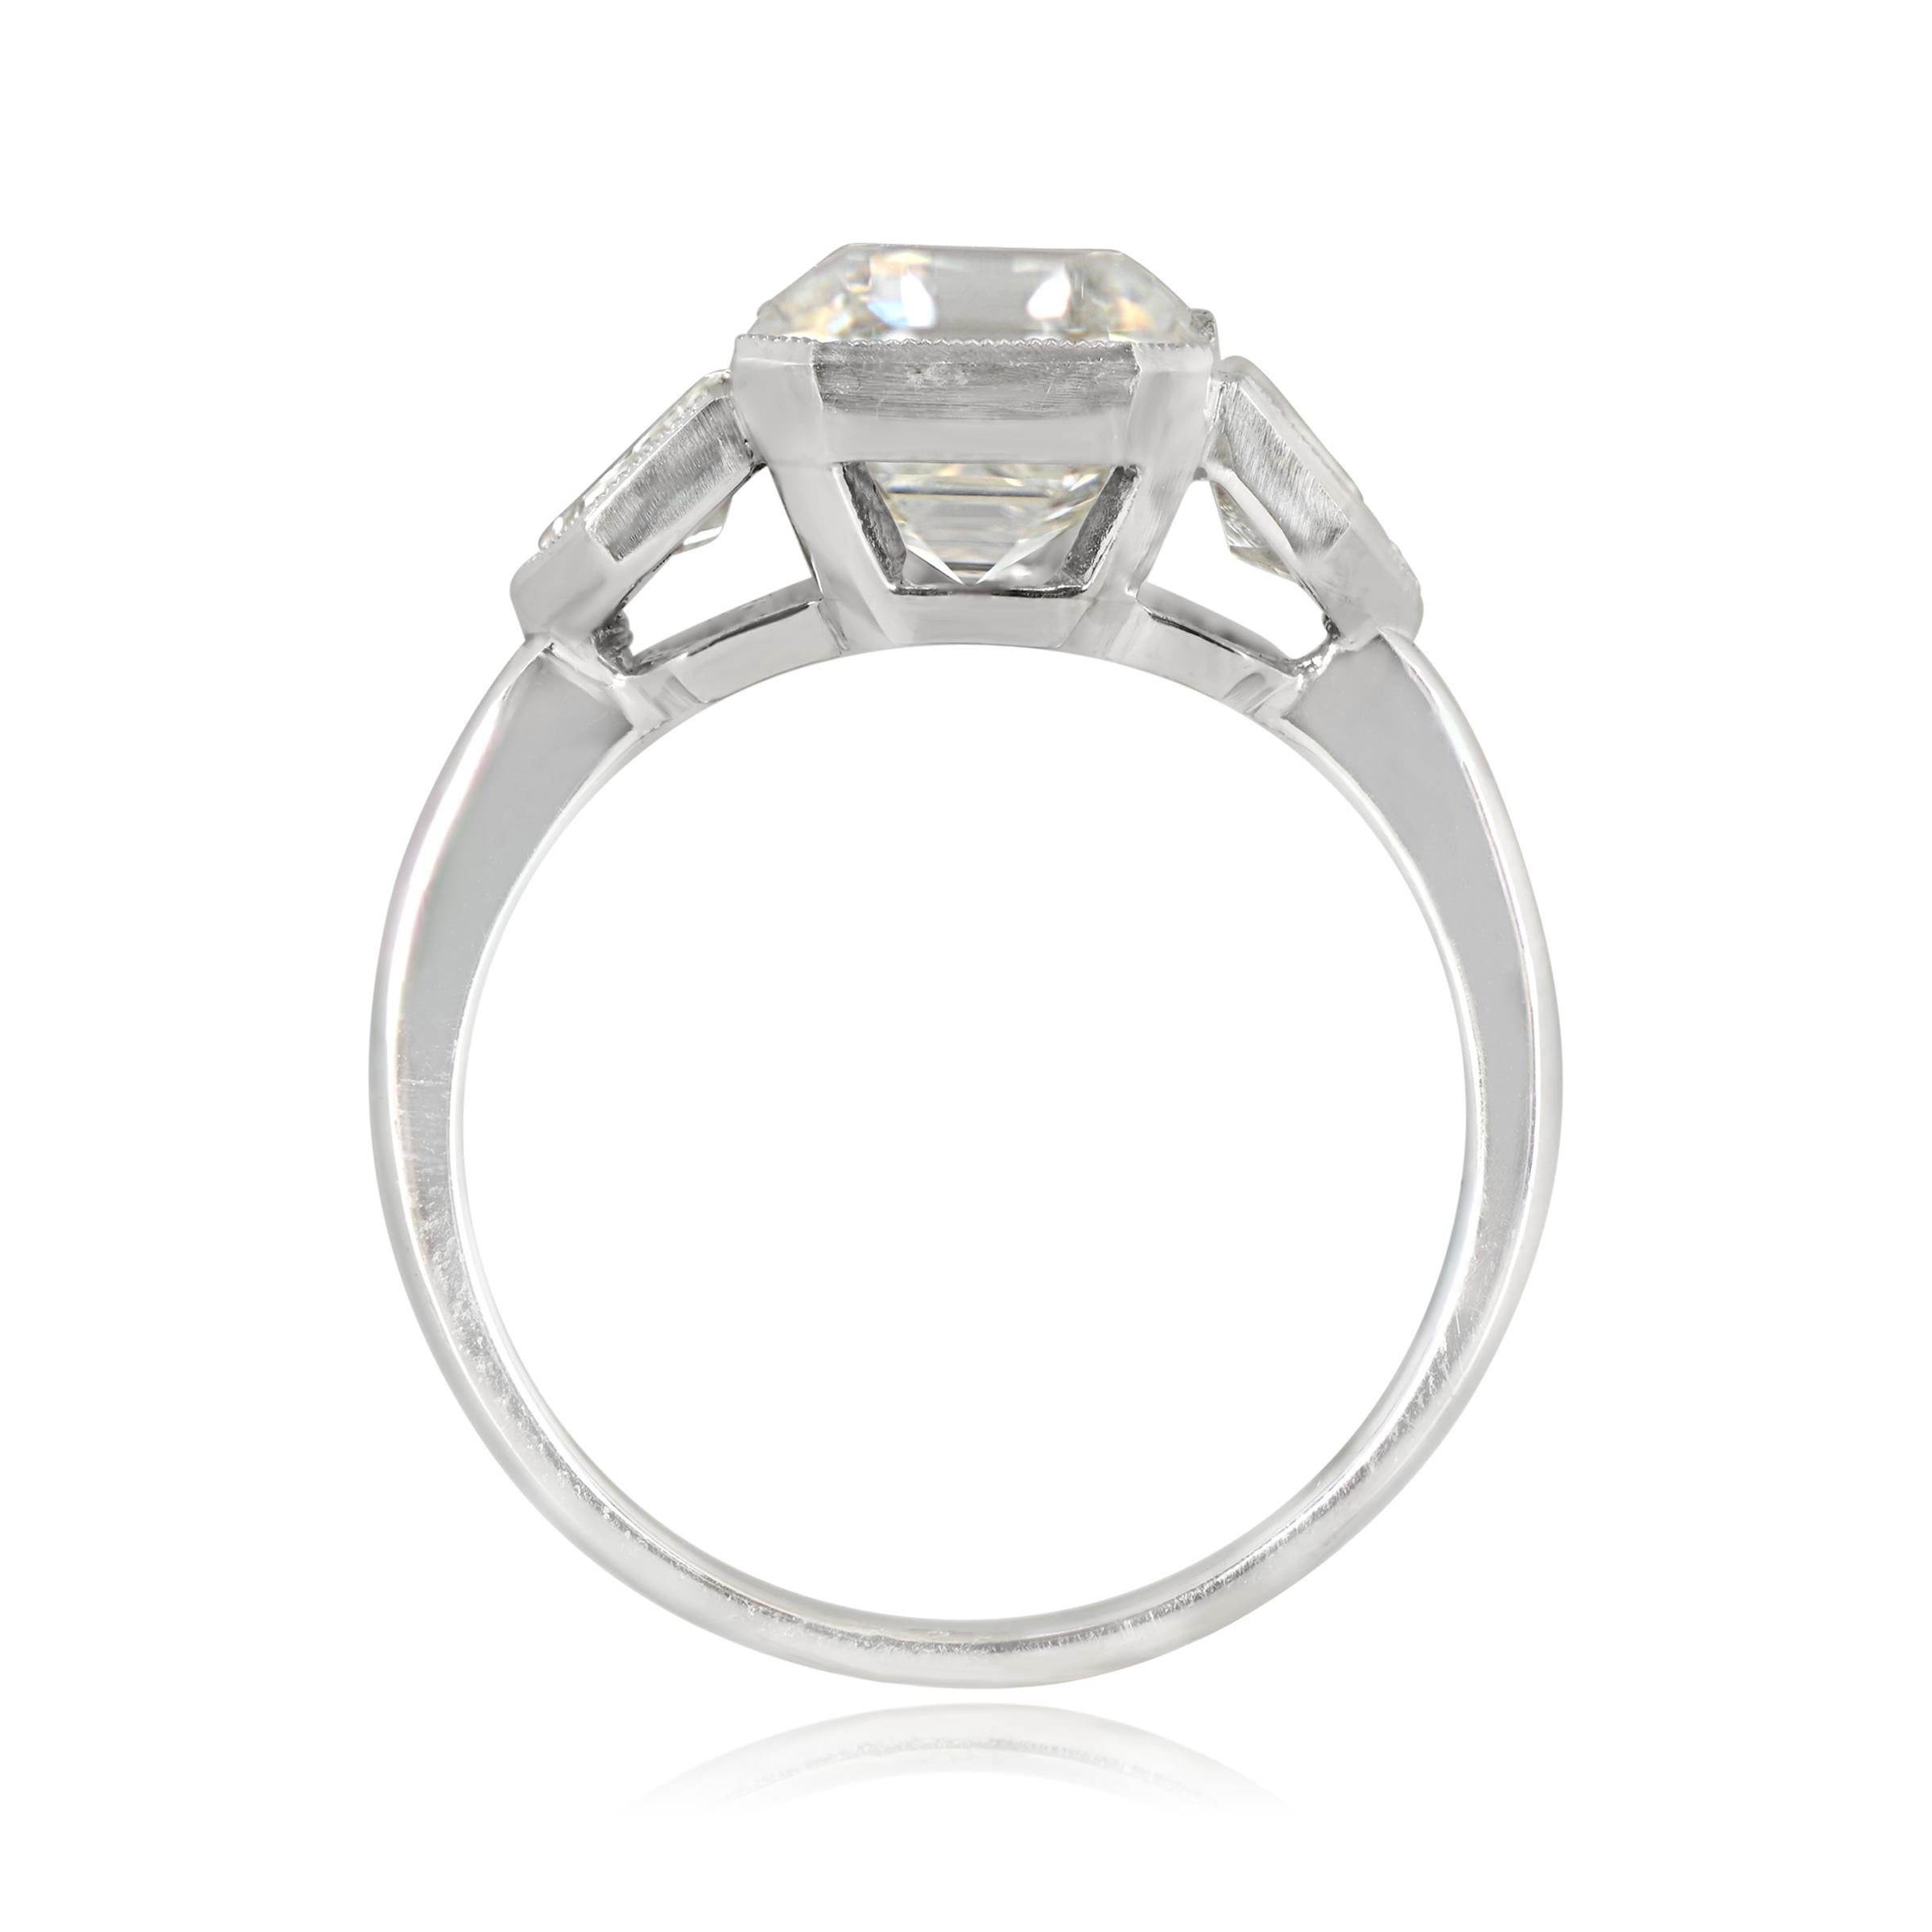 3.14ct GIA Three-Stoned Emerald Cut Diamond Engagement Ring, Platinum In Excellent Condition For Sale In New York, NY